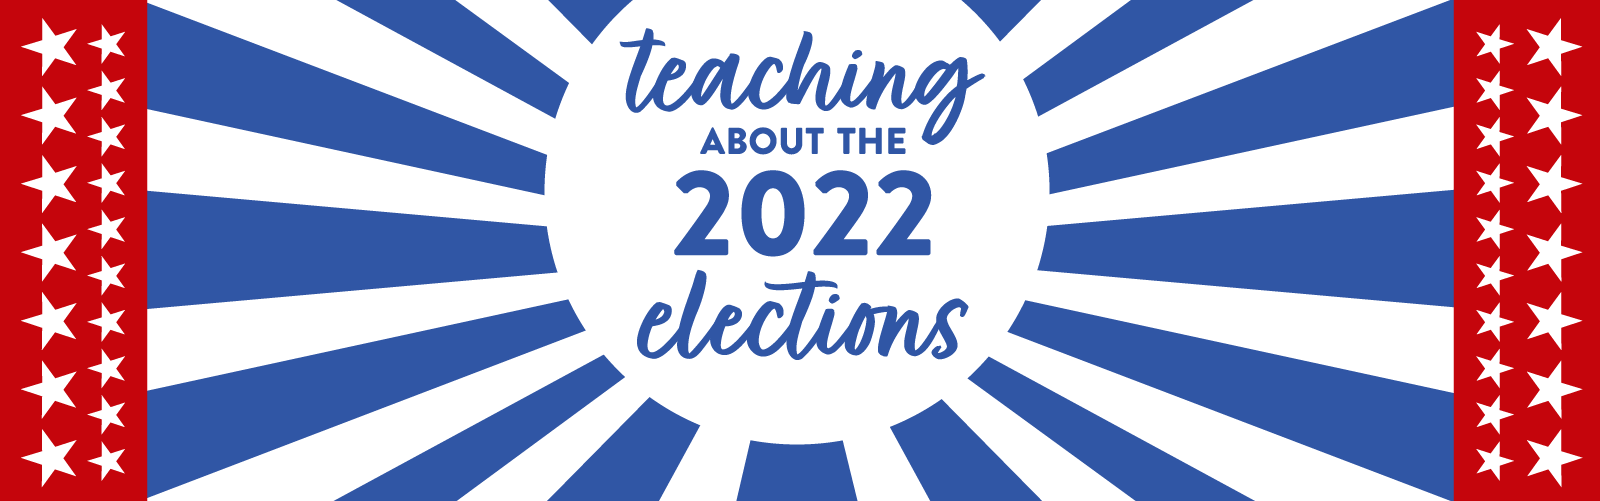 Red white and blue teaching about the 2022 elections graphic